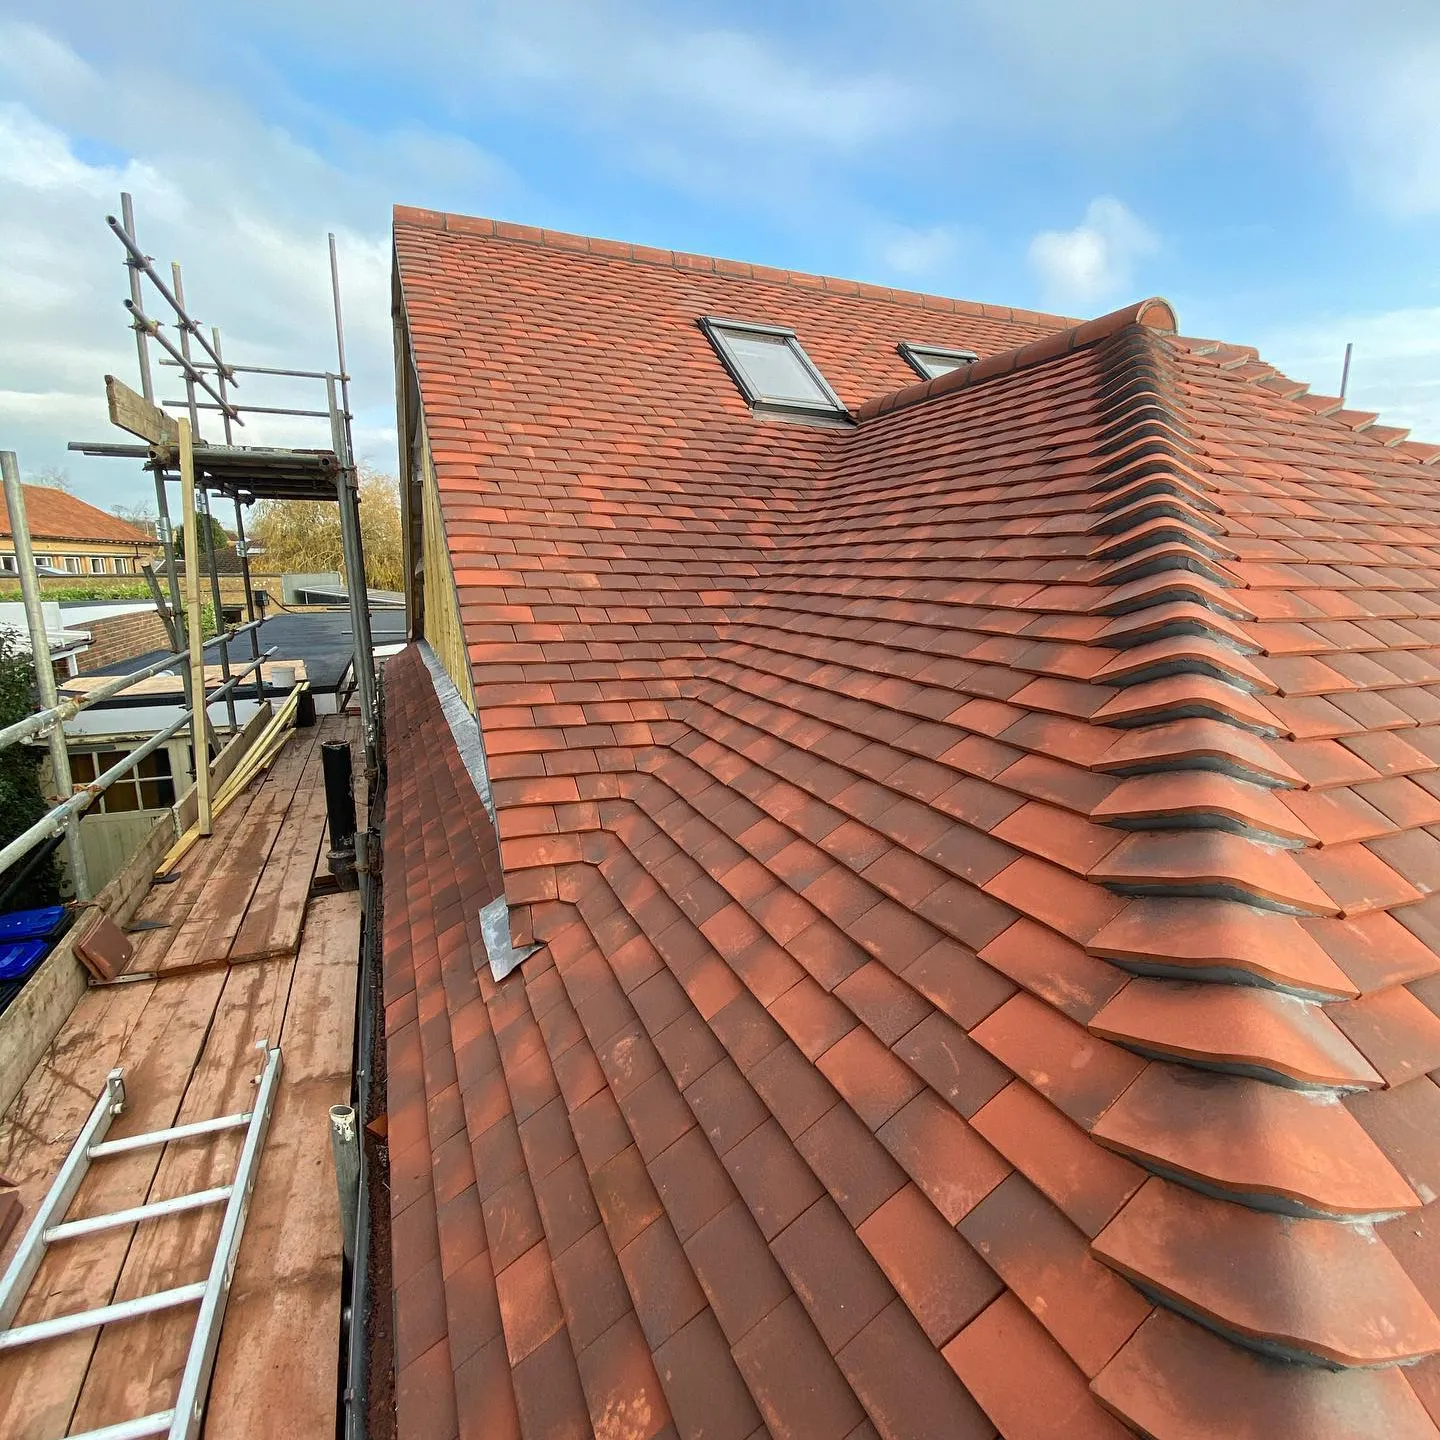 brand new red roof tiles